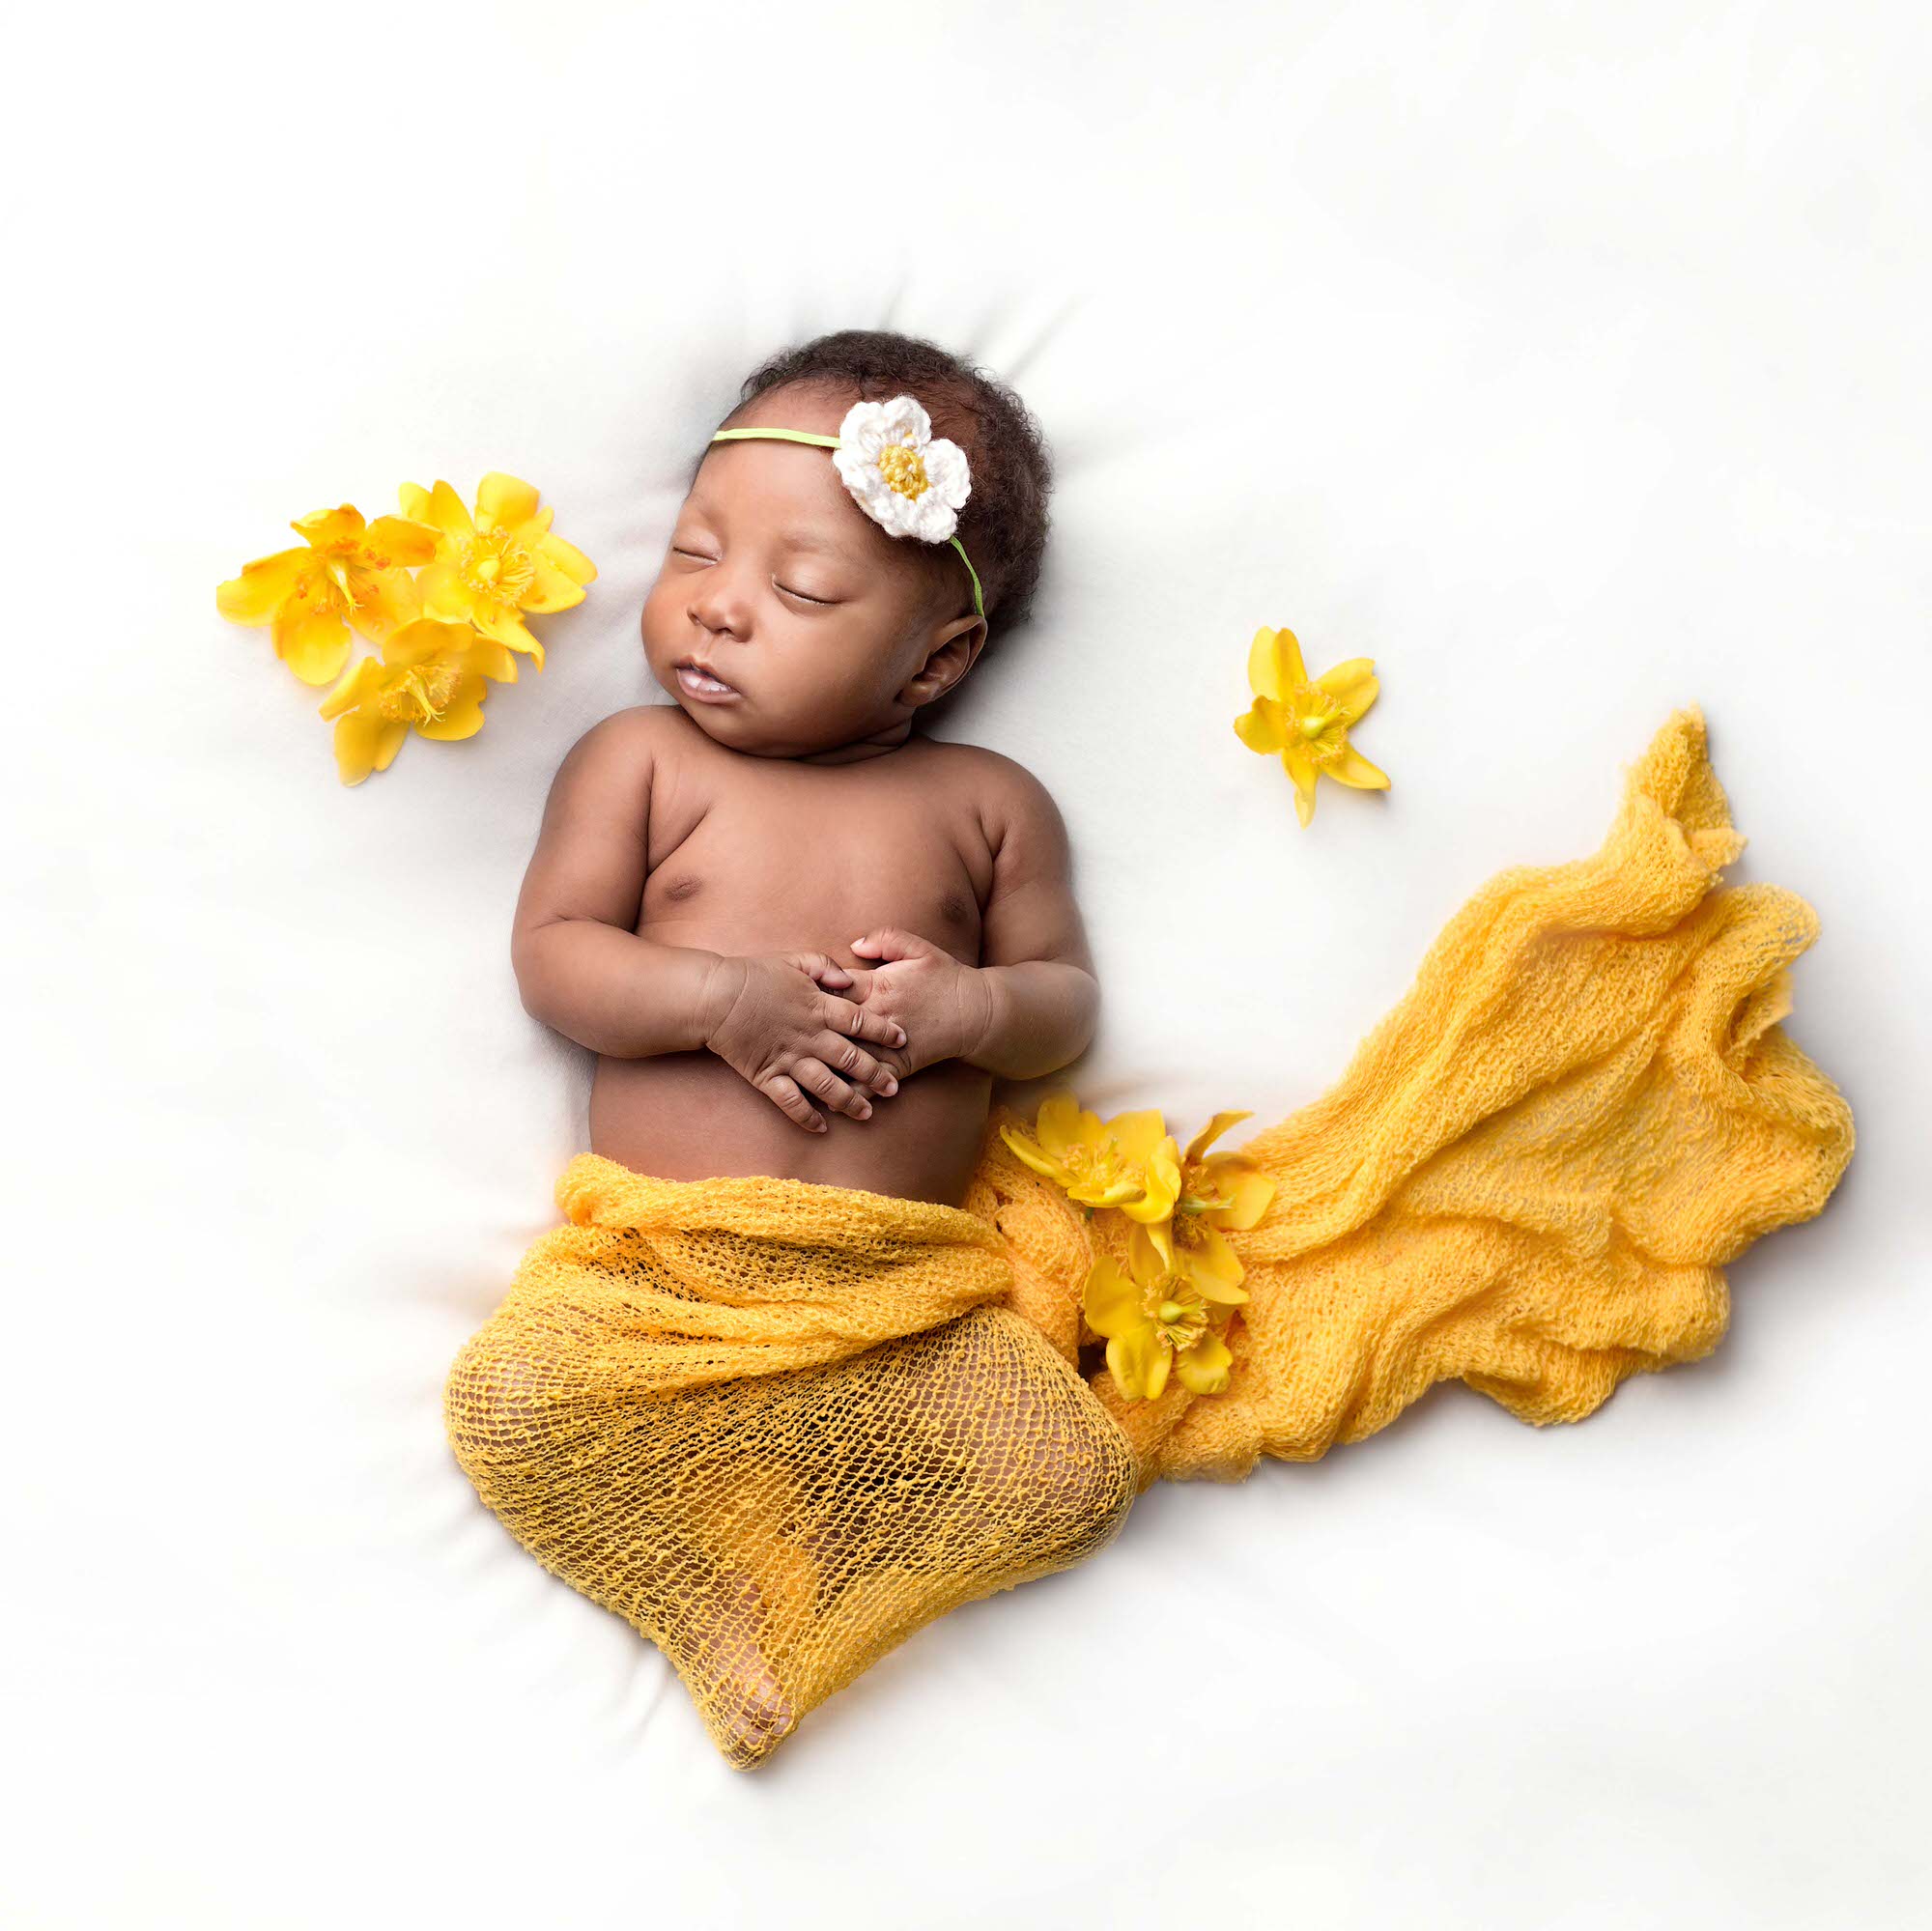 Newborn baby posed on her back, surrounded by yellow flowers